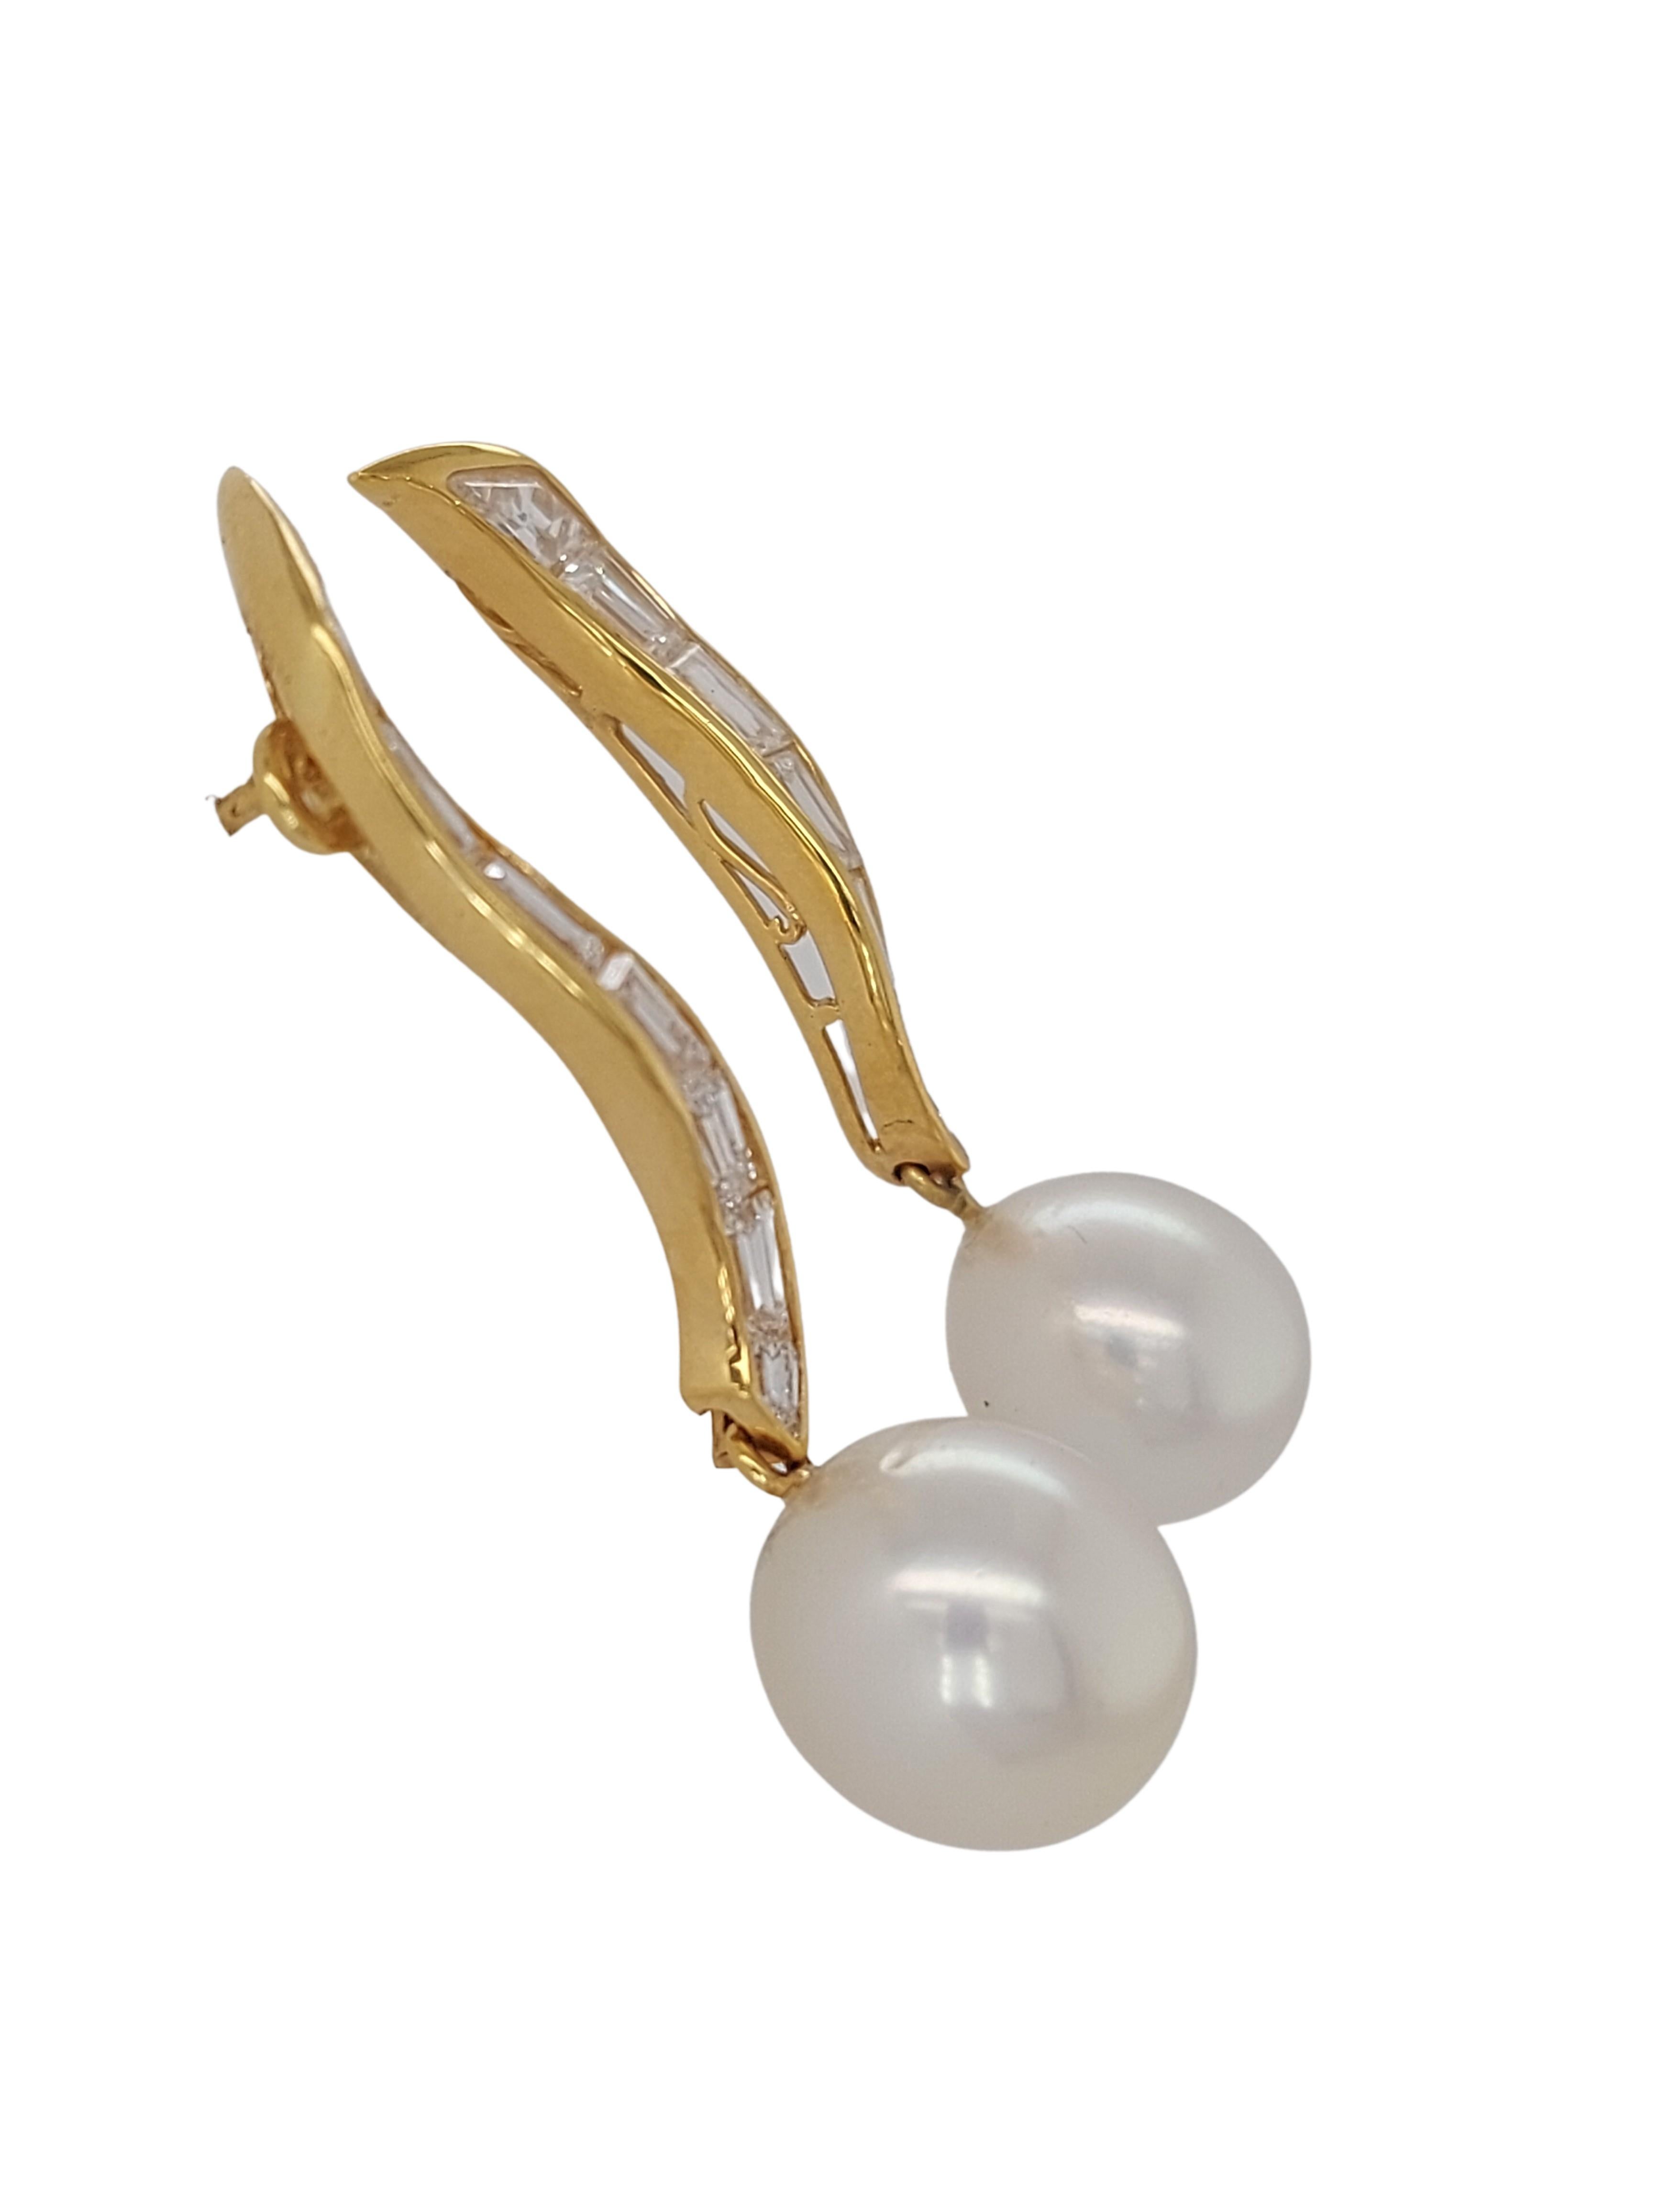 Artisan 18kt Yellow Golden Earrings with Baguette Cut Diamonds & South Sea Pearls For Sale